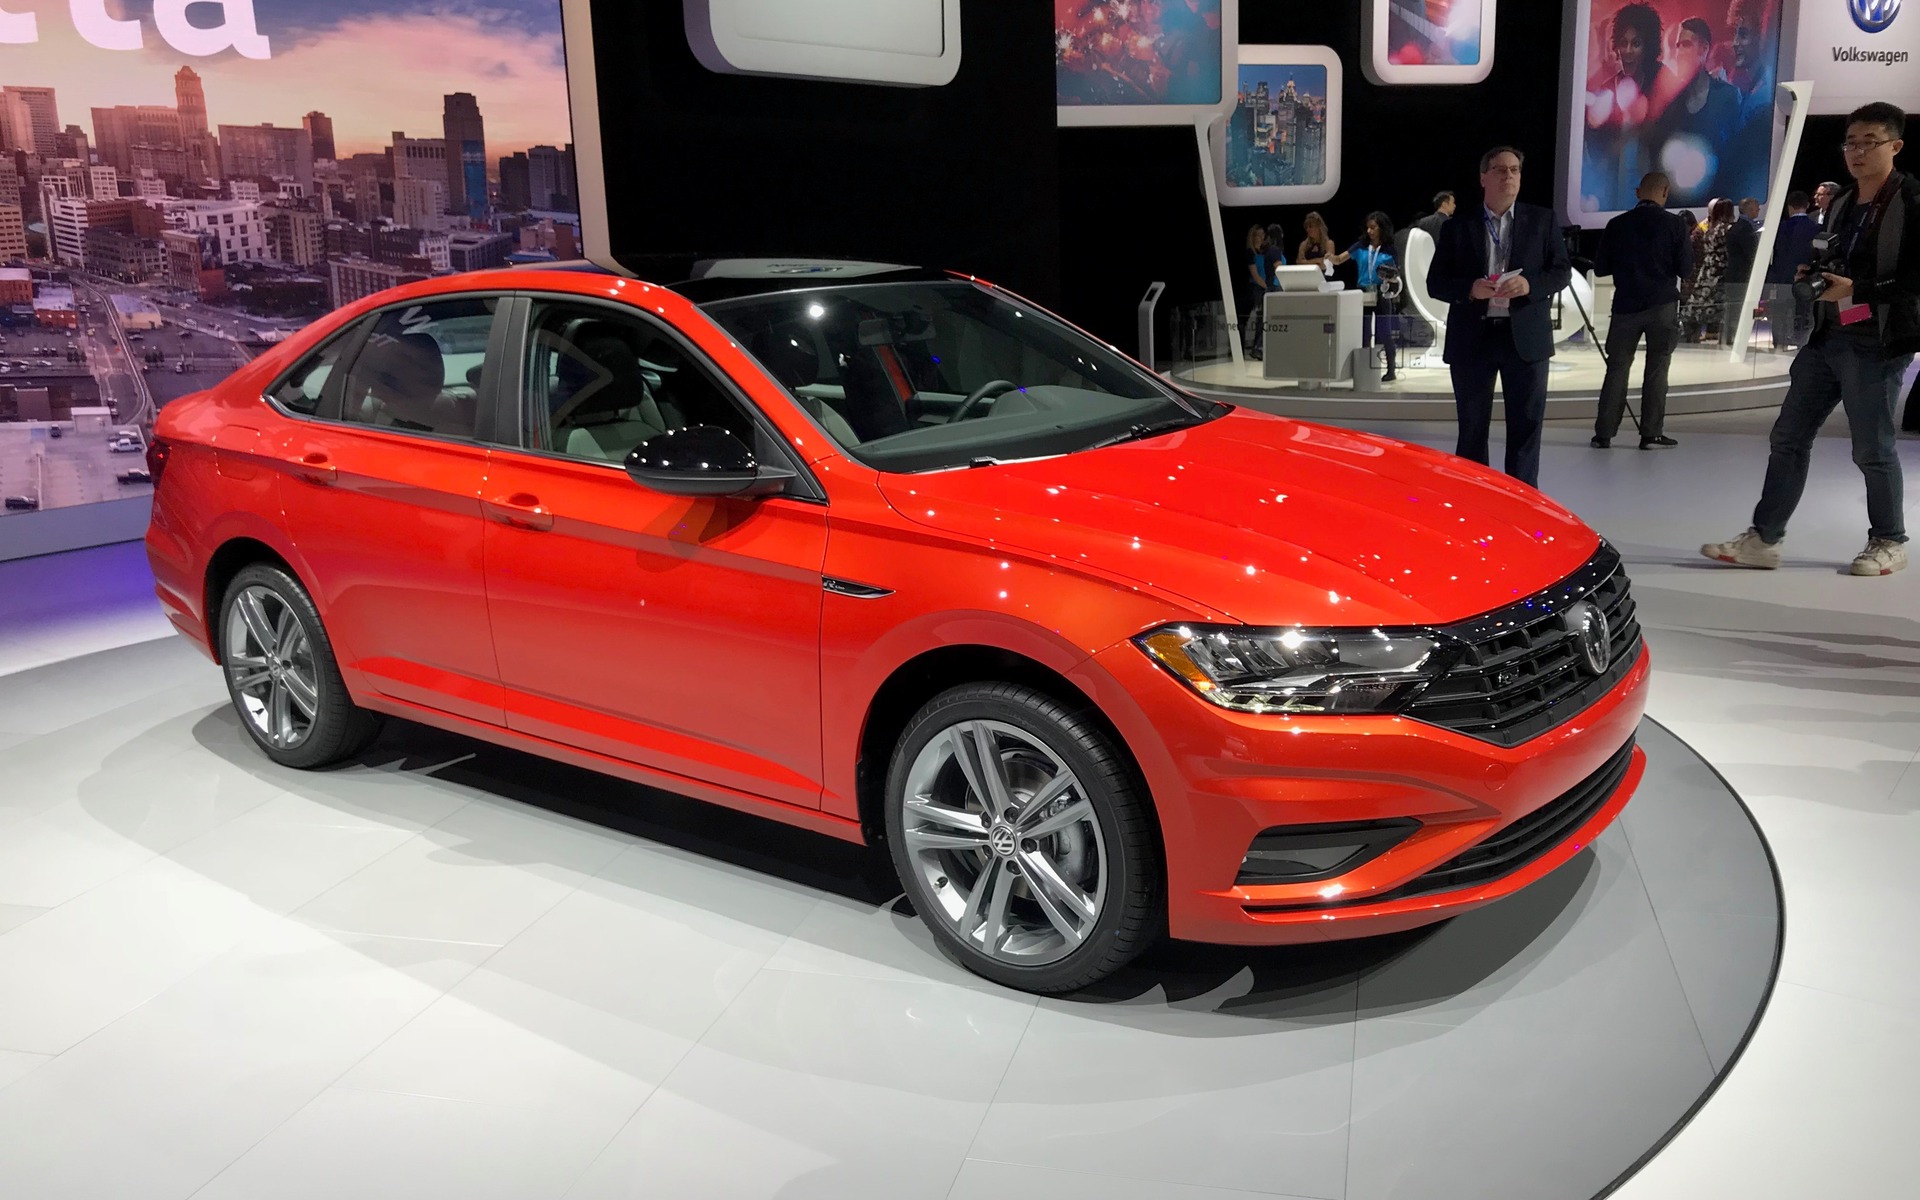 2019 Volkswagen Jetta Here s What we Know so Far The Car Guide